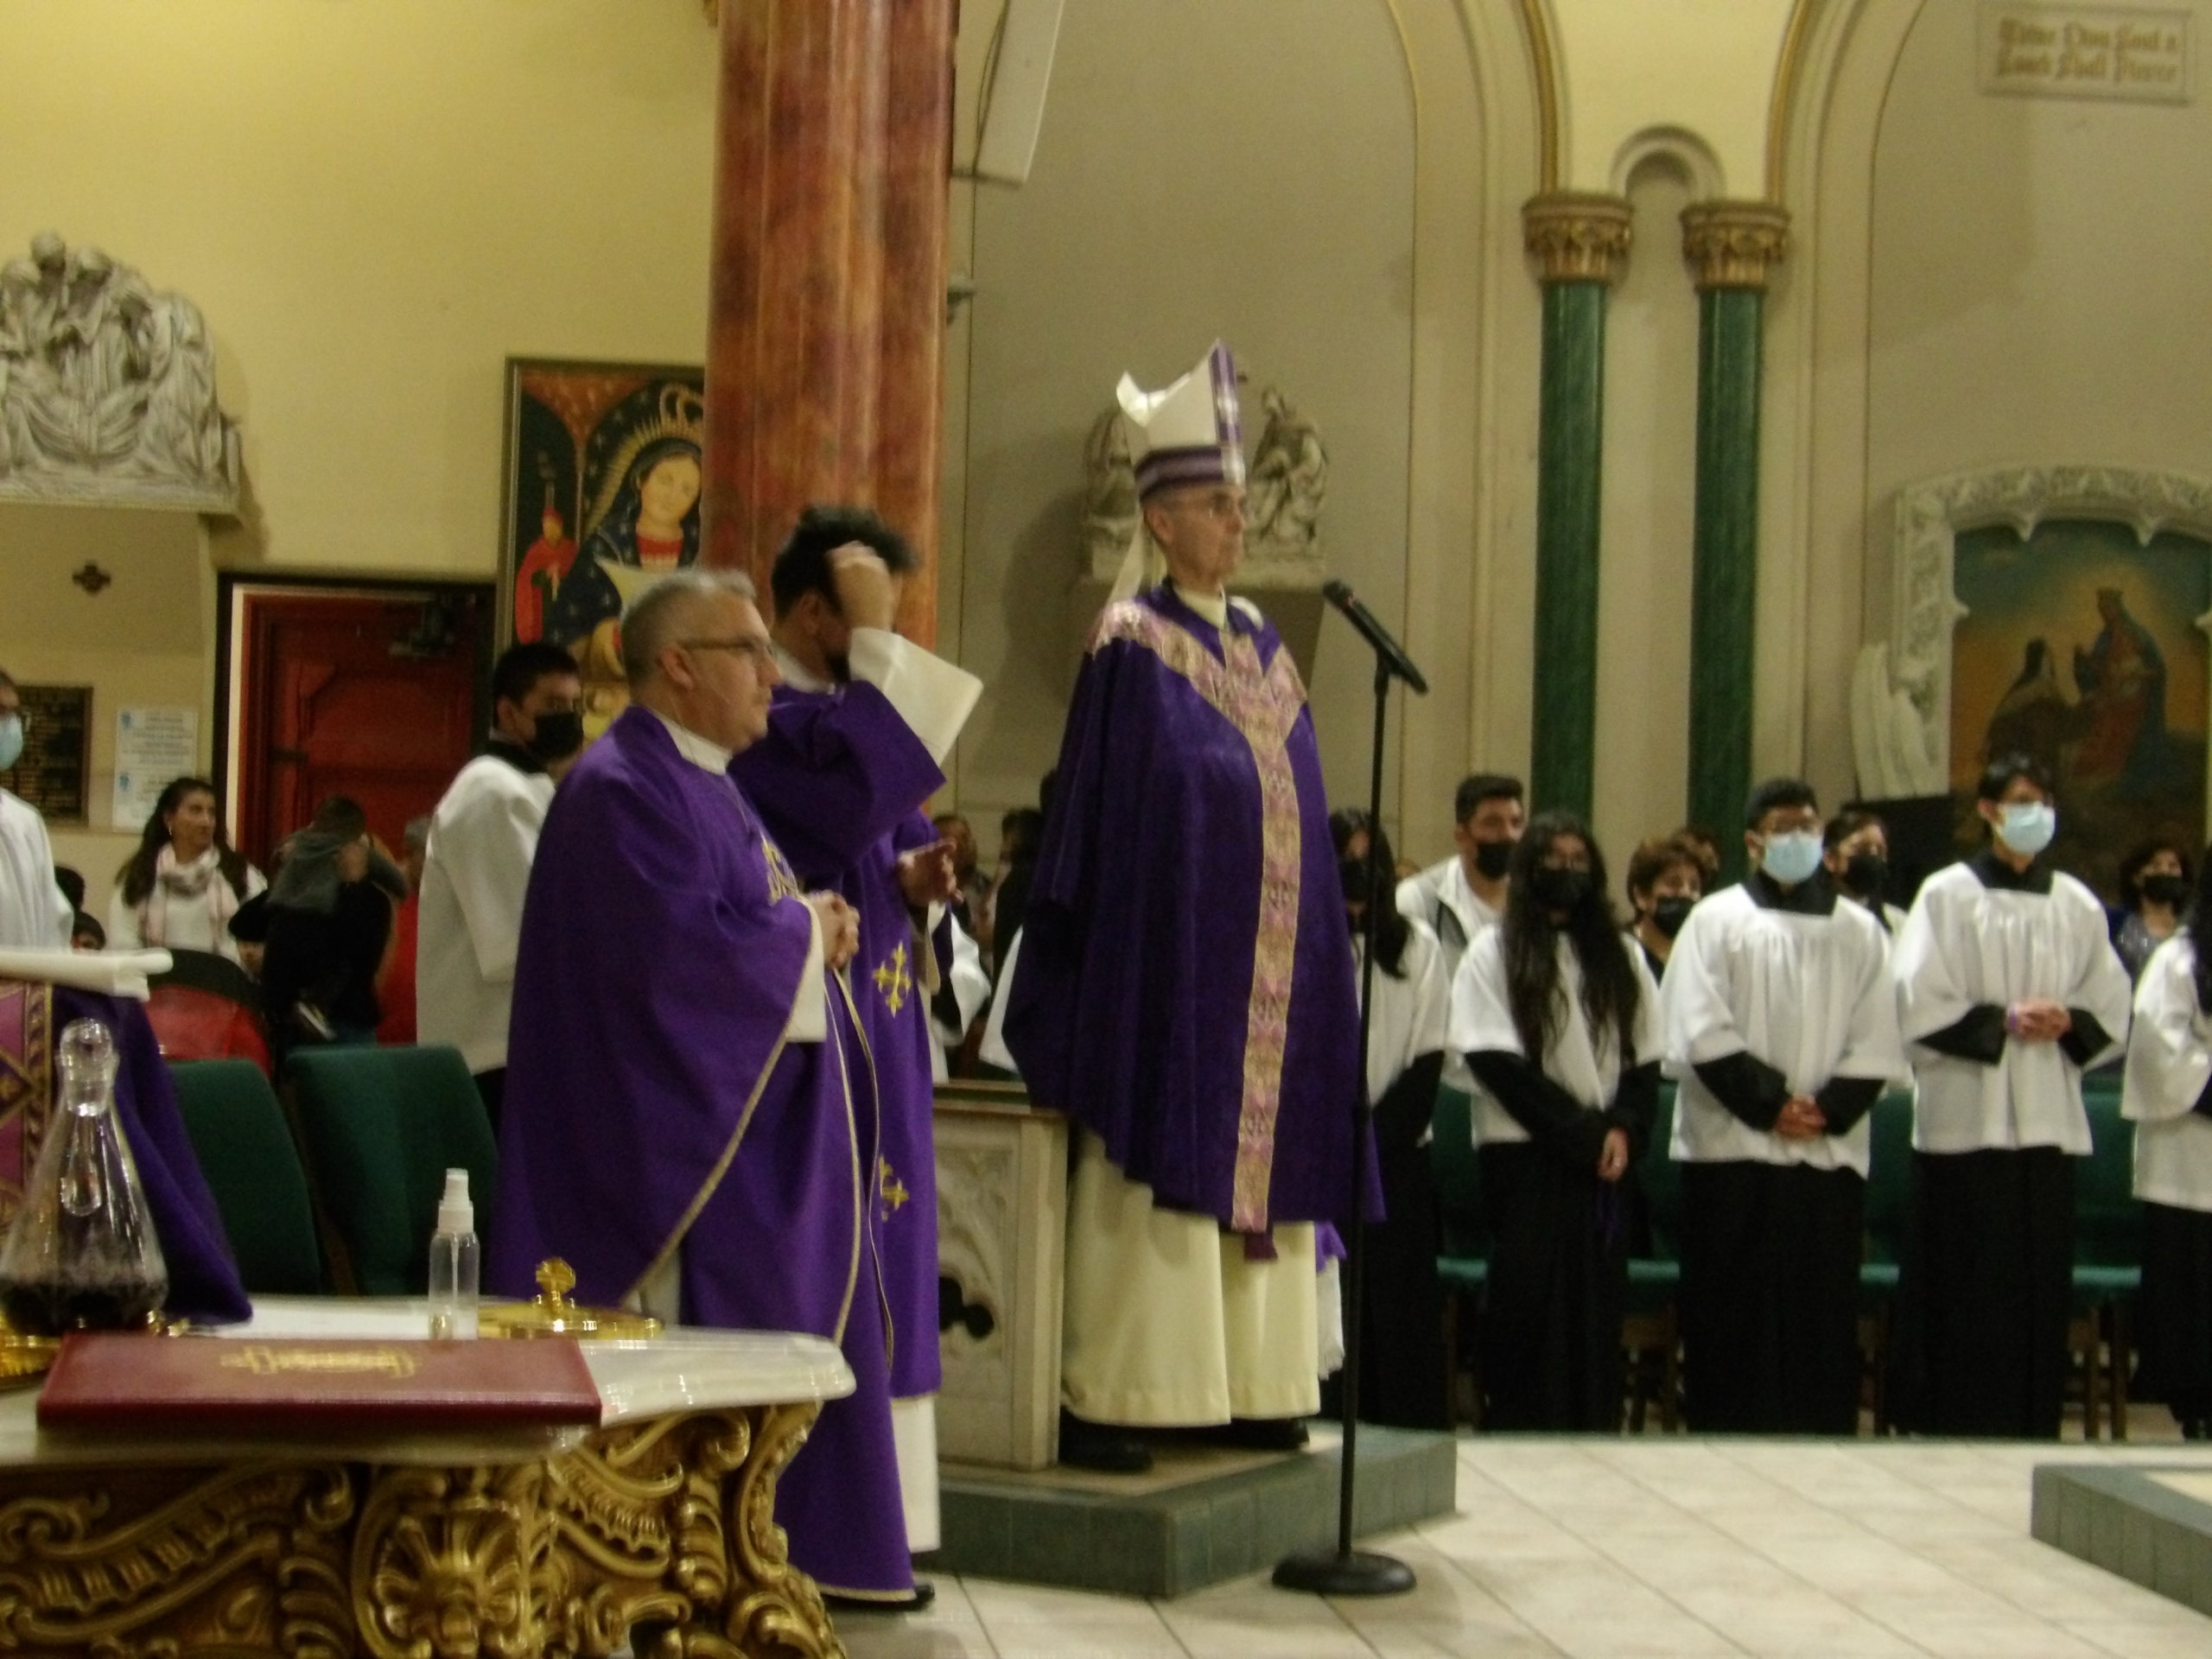 A priest is standing in front of the crowd.